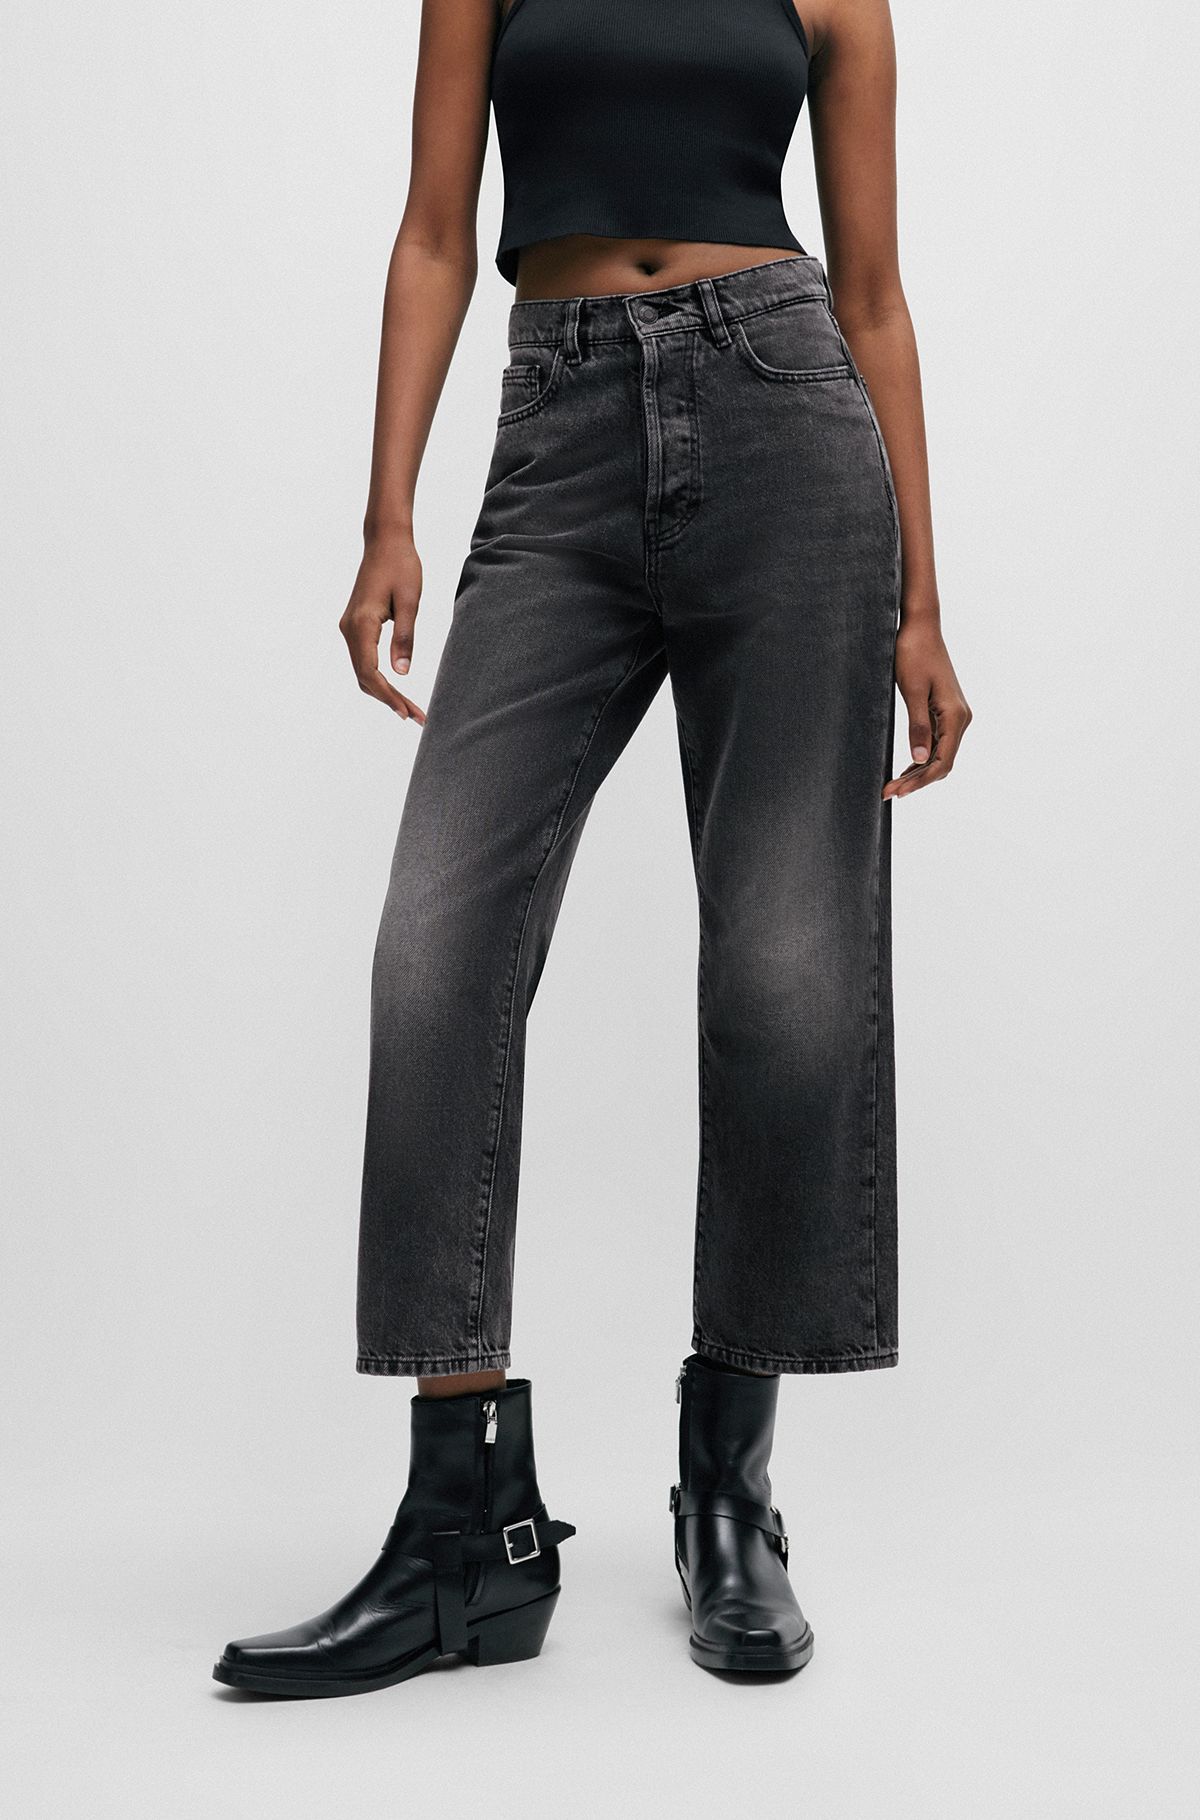 Straight Regular Ankle Jeans - Gris oscuro - MUJER